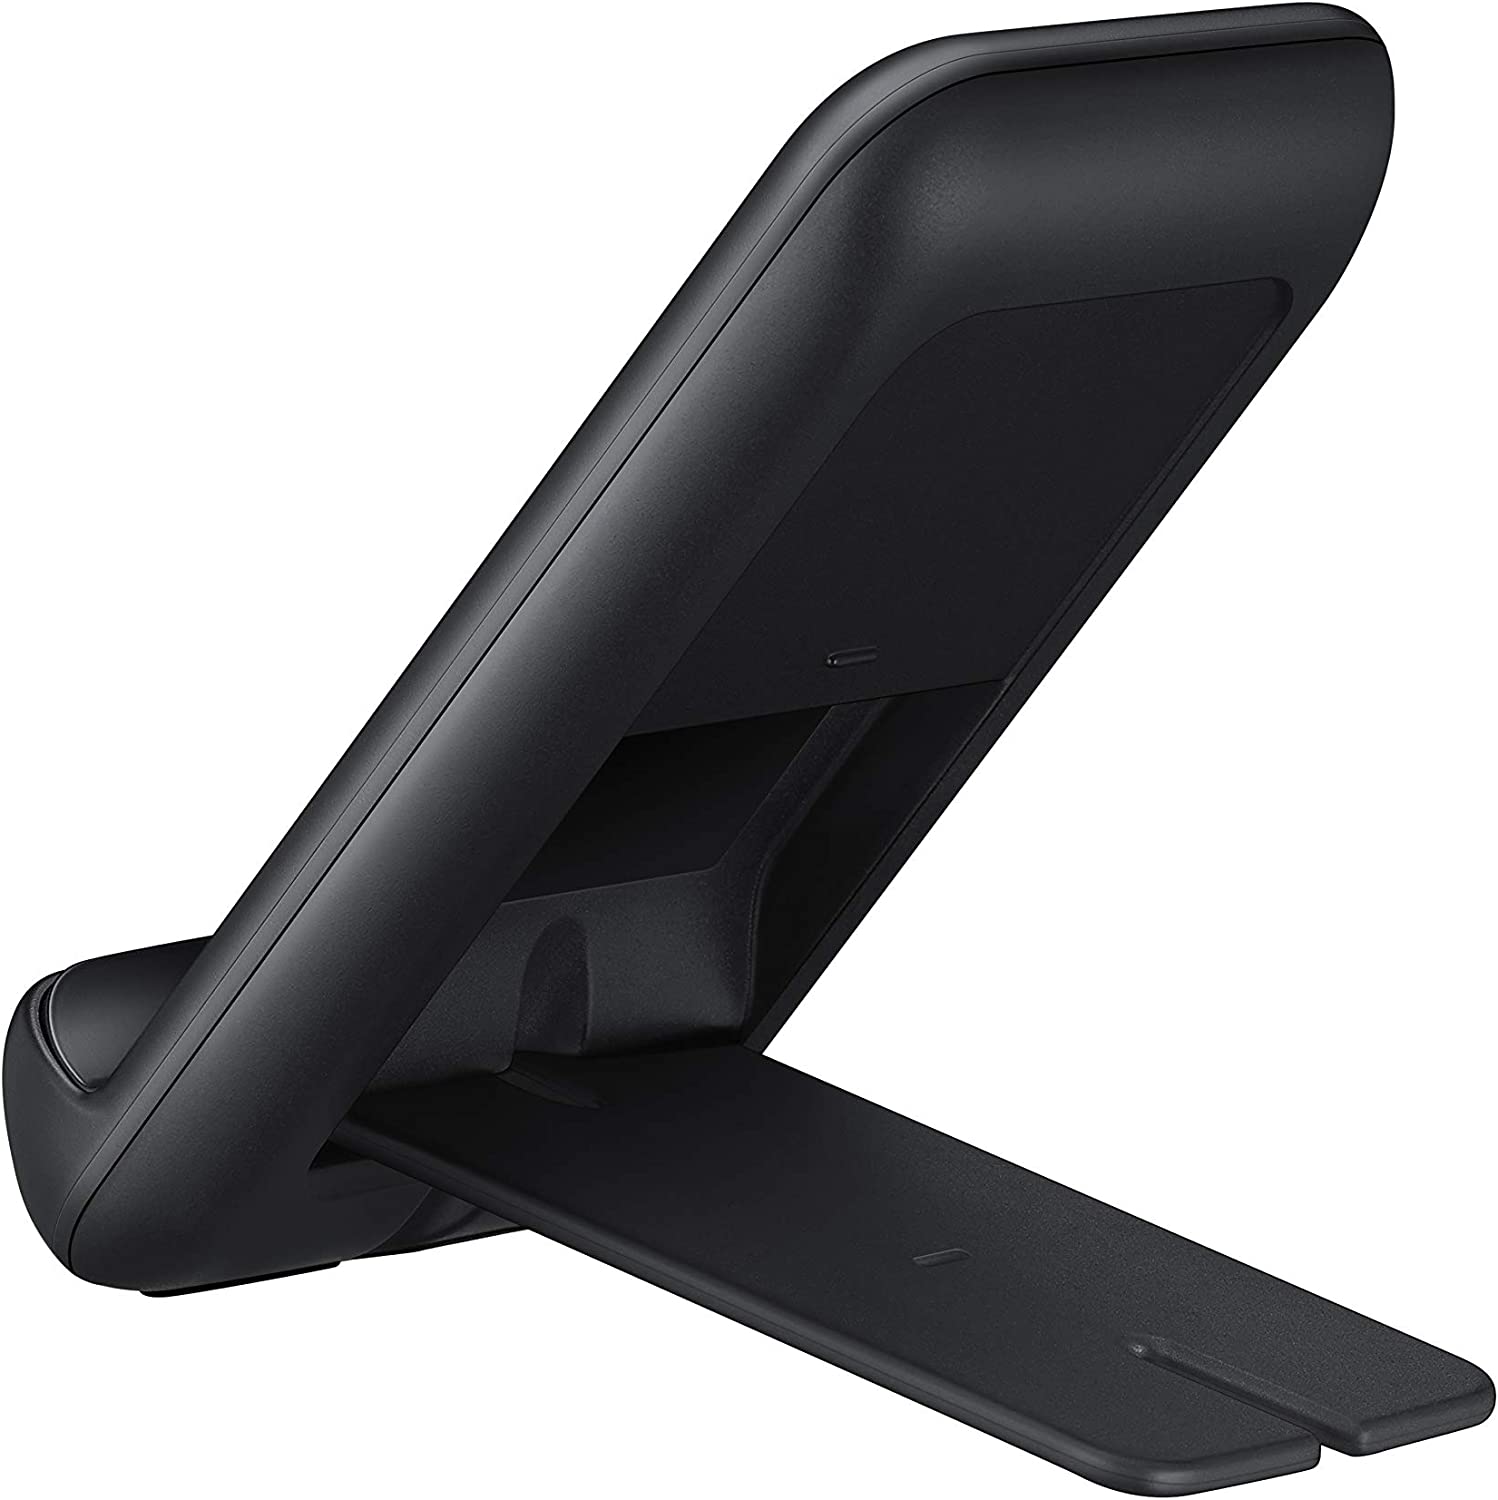 Samsung 9W Qi Enabled Convertible Wireless Charger